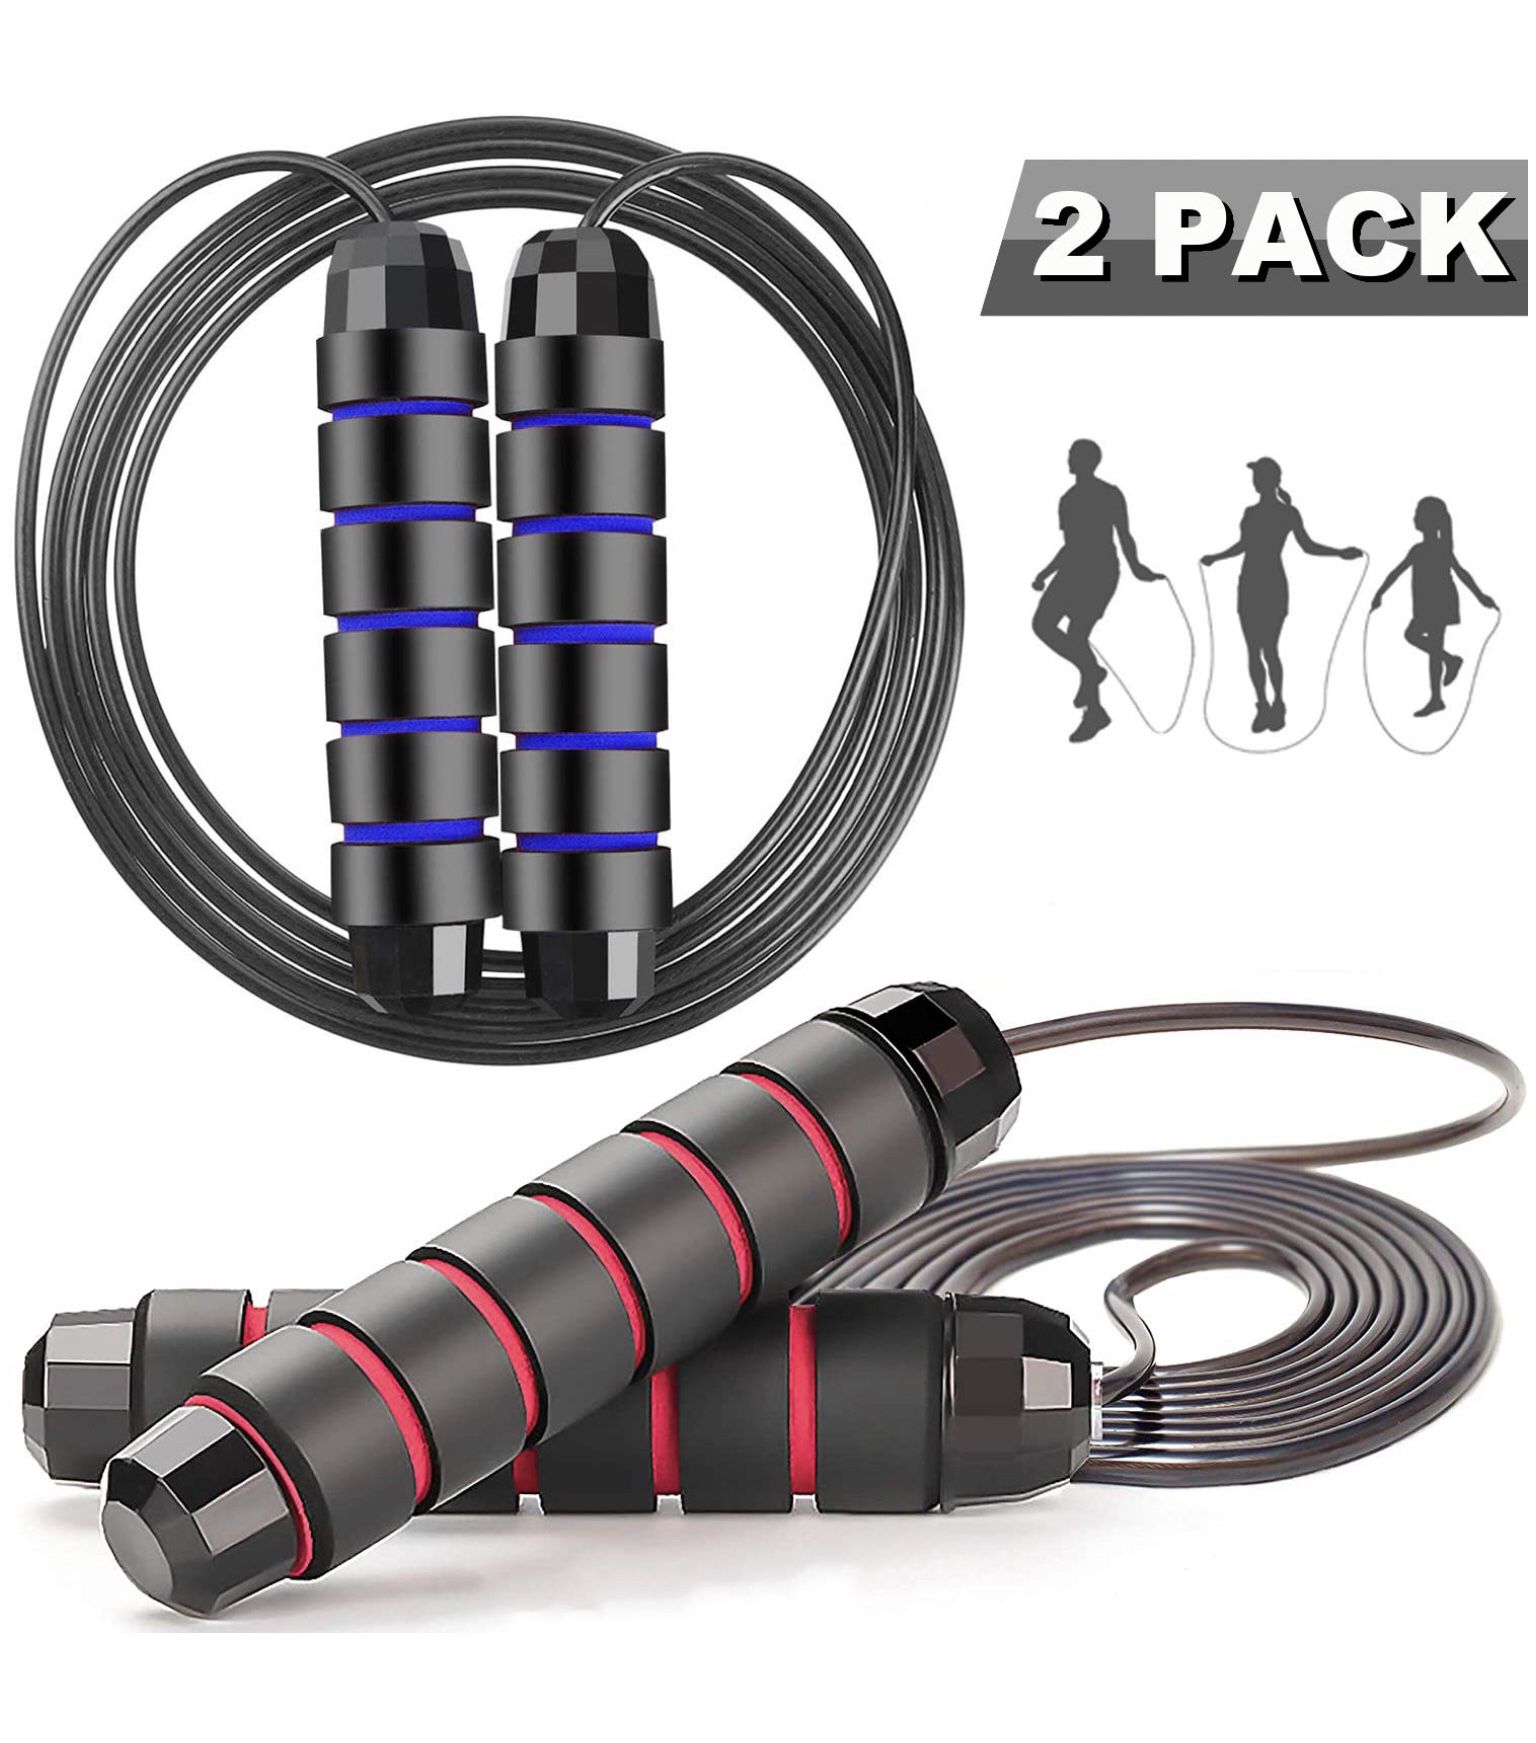 Adicop 2 Pack Jump Rope Ball Bearings Tangle-Free Rapid Speed Cable Skipping Rope Adjustable Jumping Ropes with 6" Memory Foam Handles for Men Women